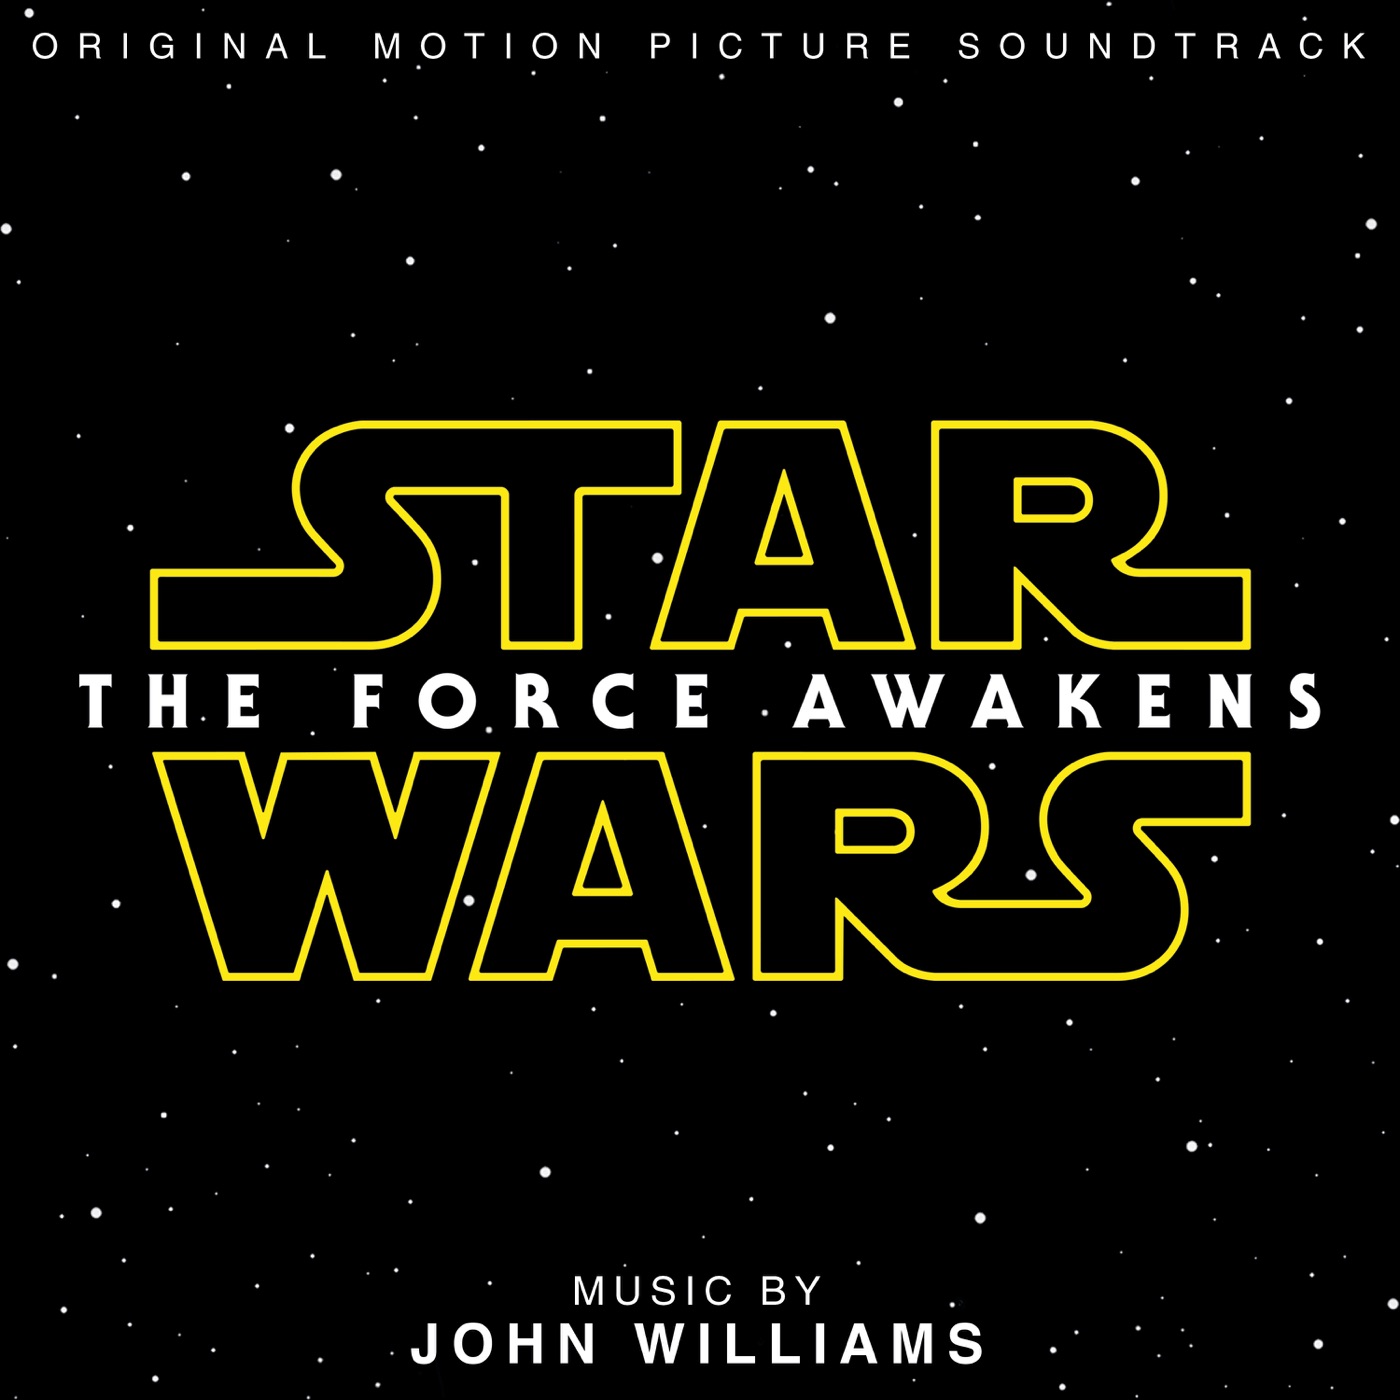 Star Wars: The Force Awakens by John Williams